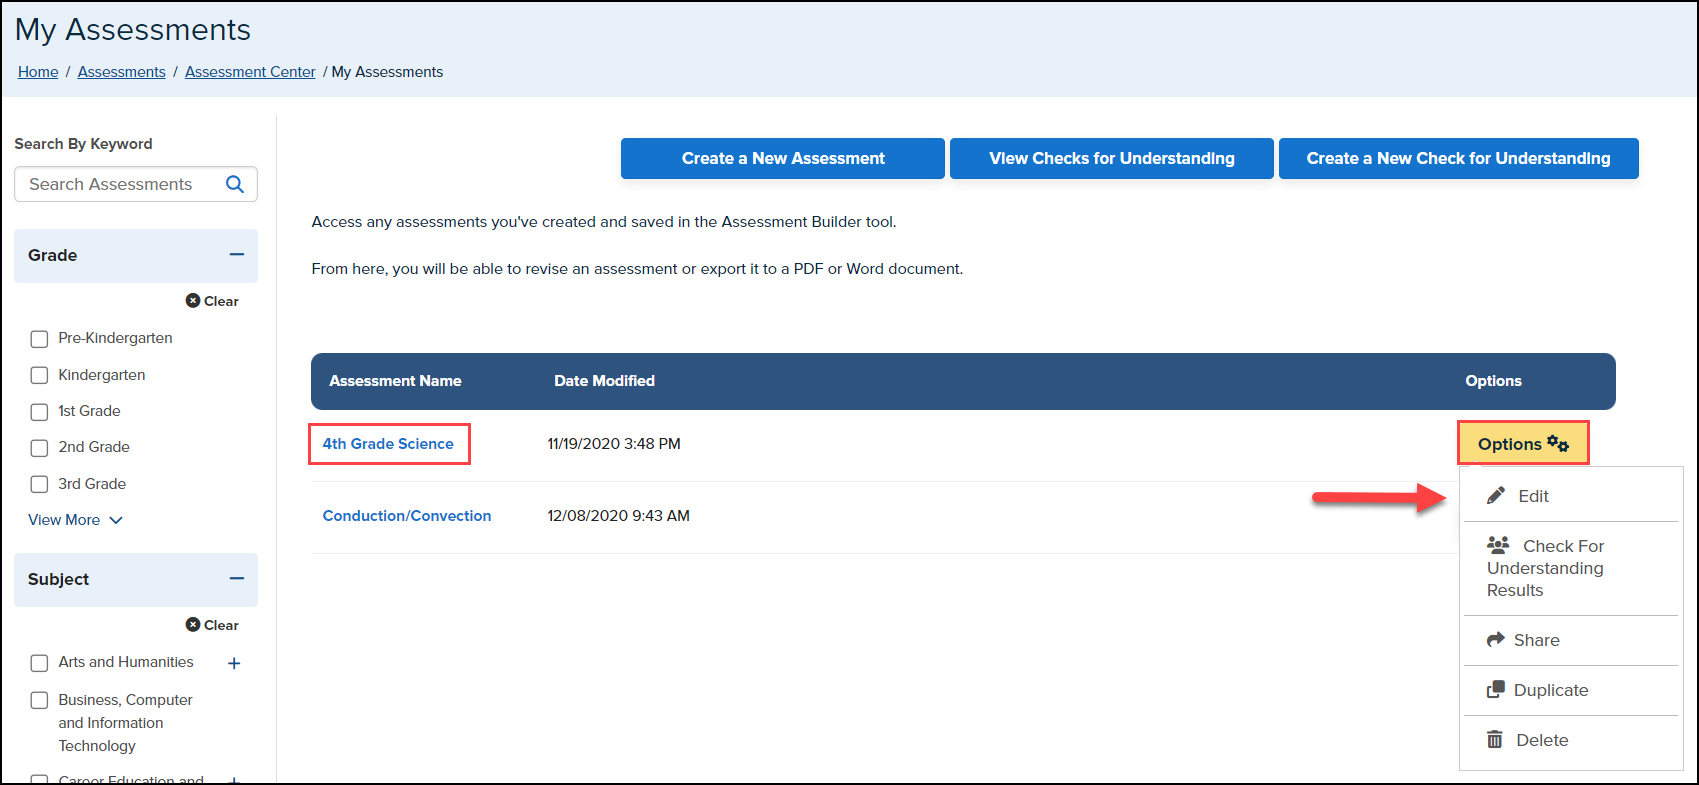 my assessments page with assessment title and options button highlighted